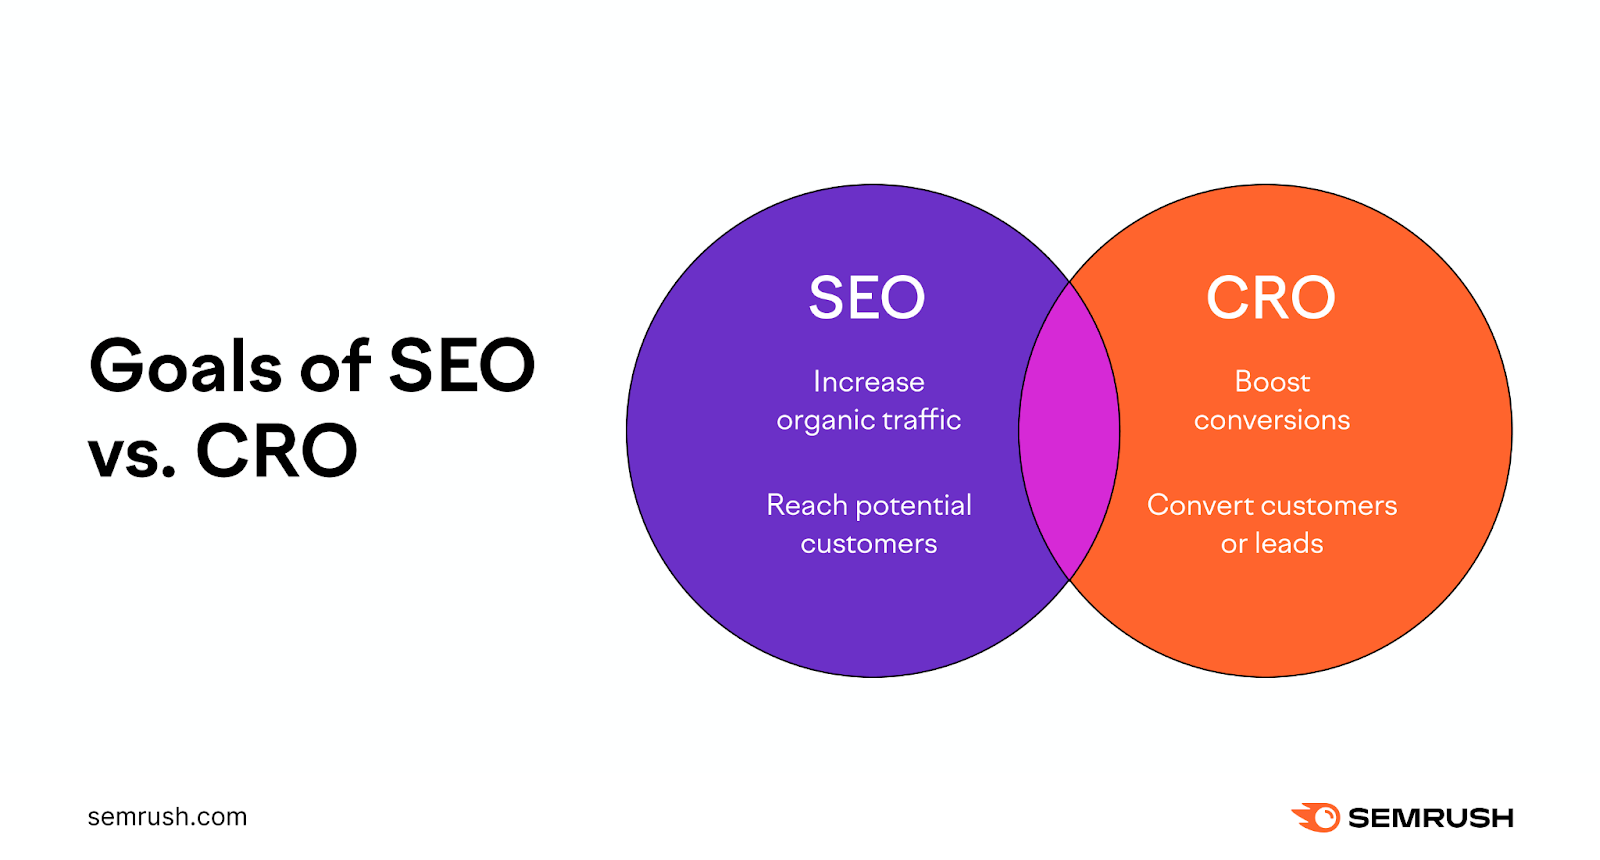 The extremity   of SEO is to increate integrated  postulation   and scope   imaginable   customers. The extremity   of CRO is to boost conversions and person  customers oregon  leads.